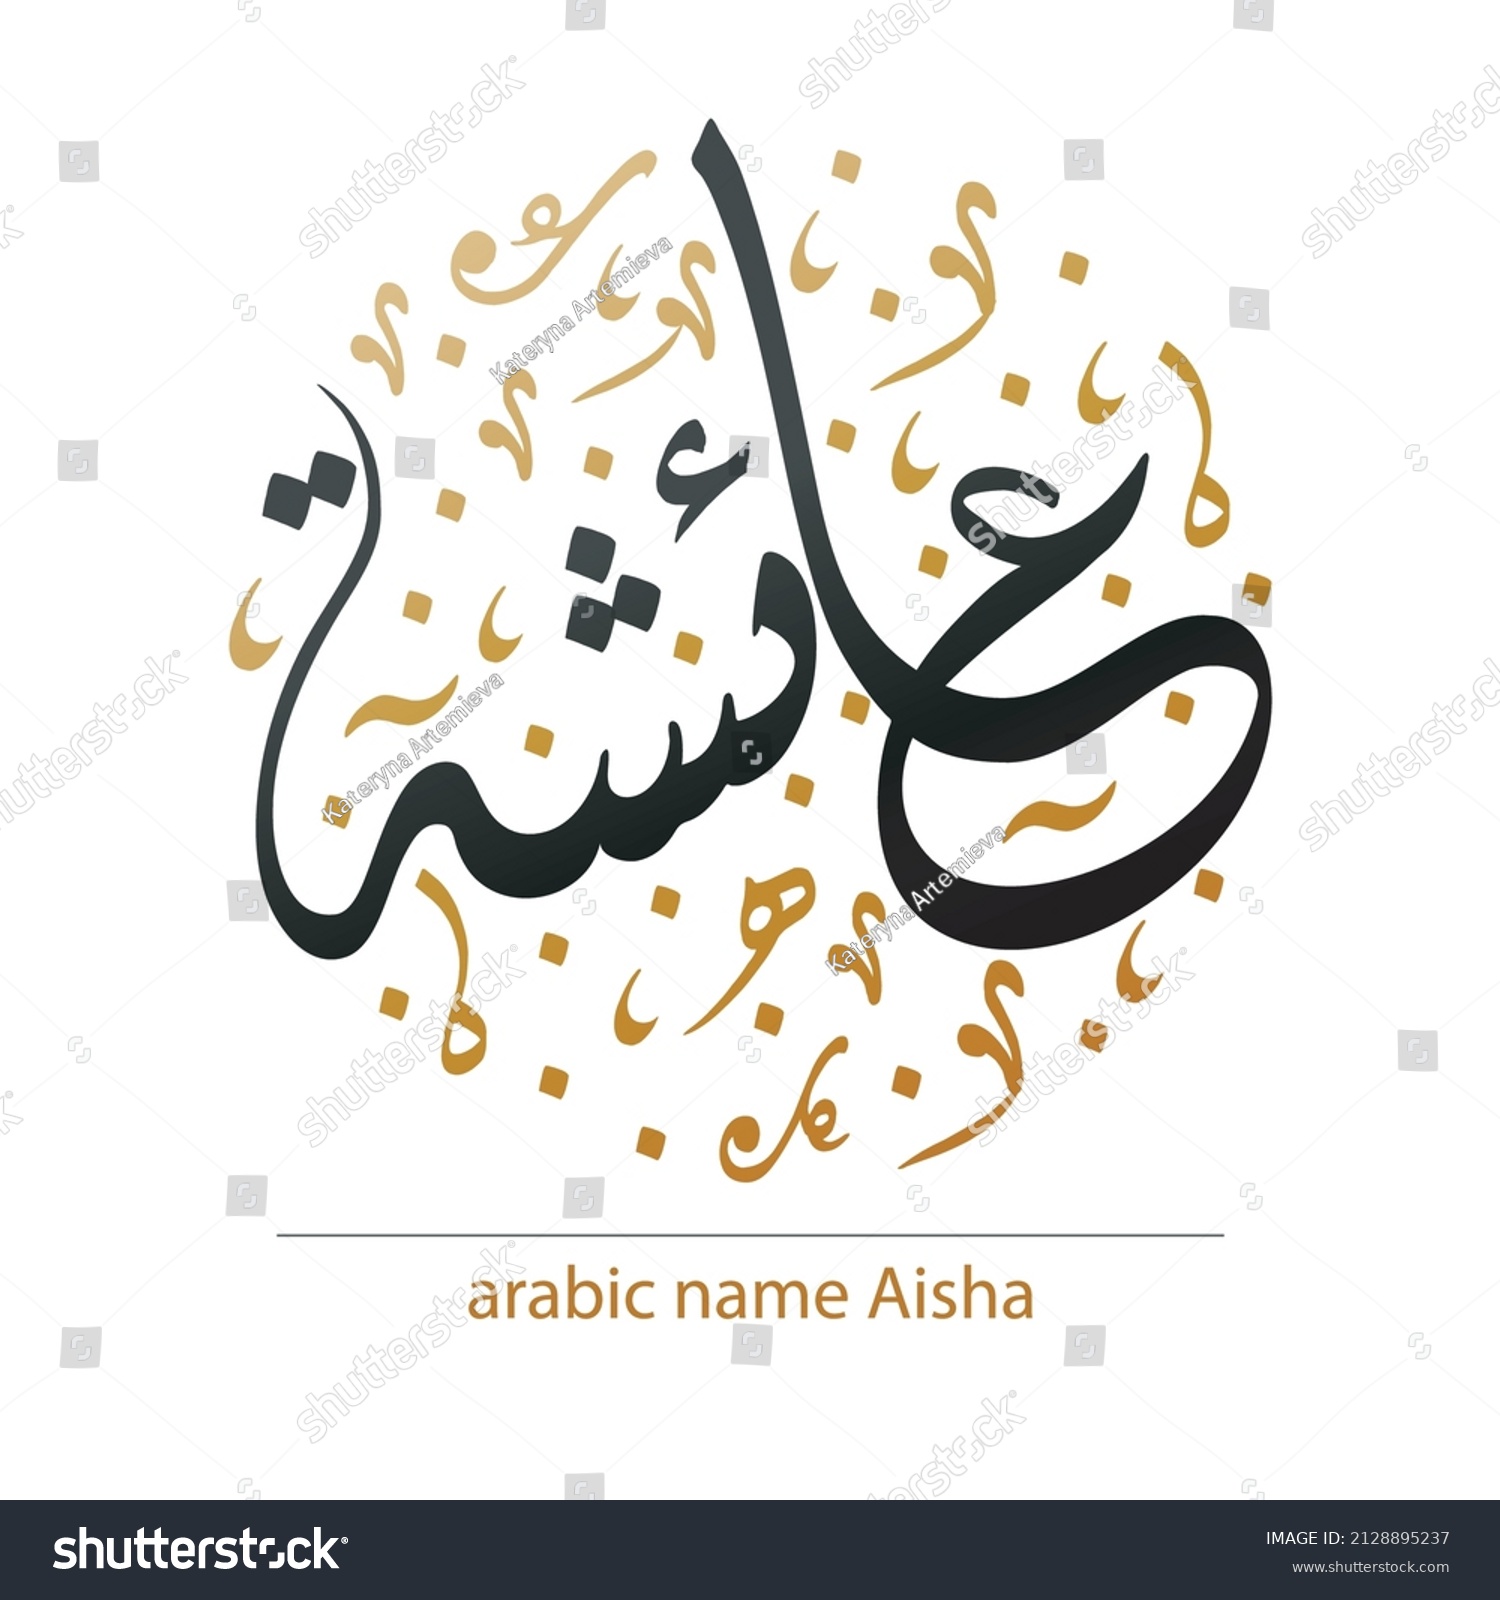 SVG of Arabic name Aisha in round shape. Arabic calligraphy. Beautiful logo, personal name design template. Vector illustration svg